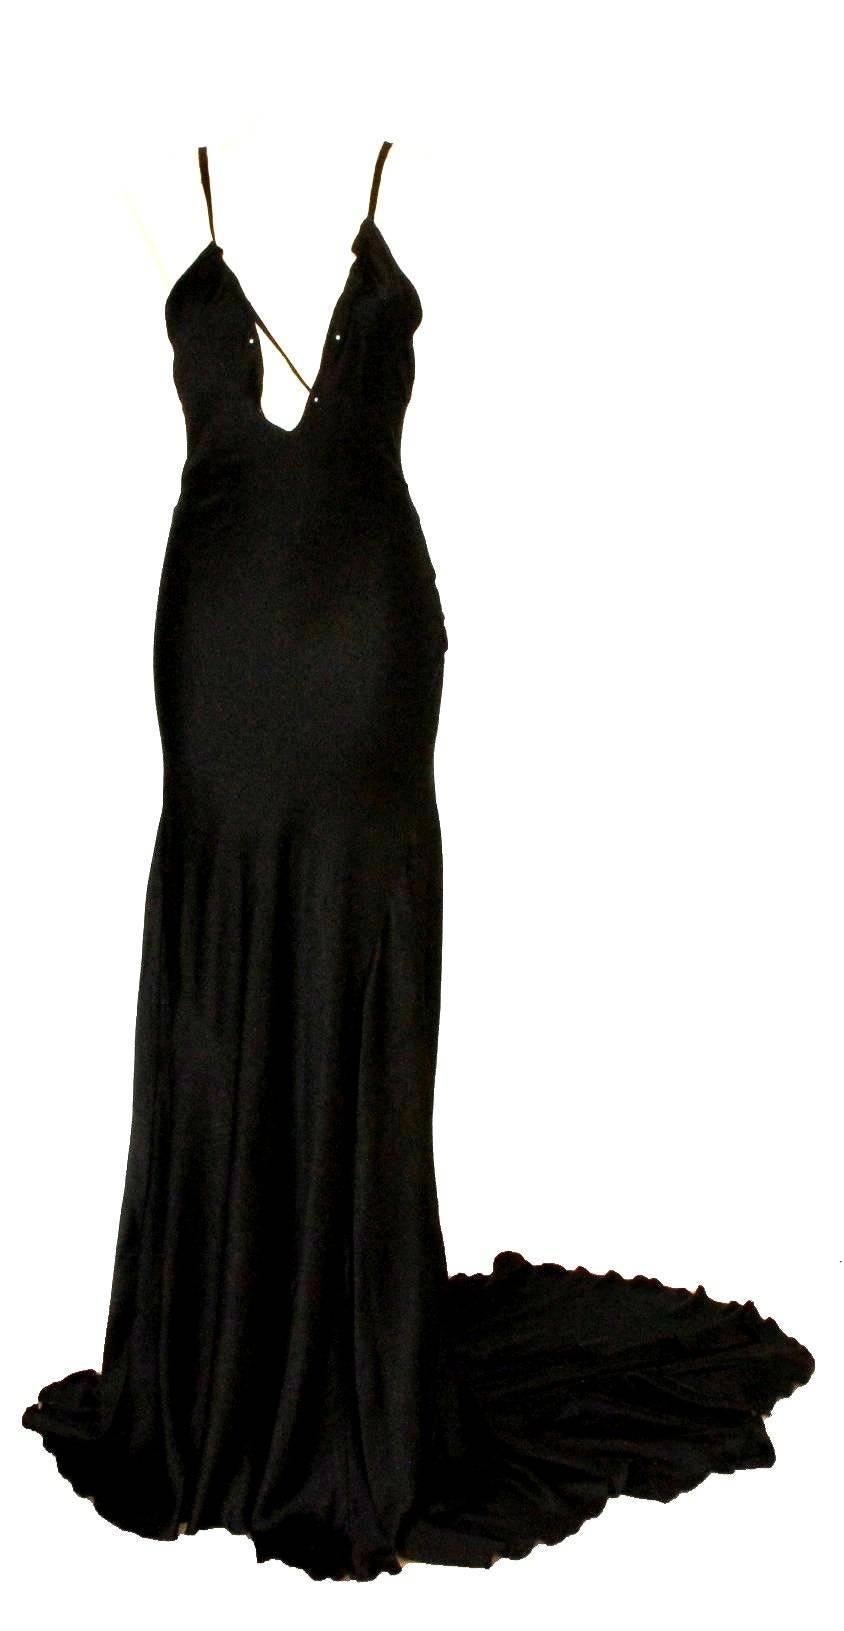 
Rare Collector's item

Beautiful black evening silk lace-up evening gown

by Tom Ford for Gucci FW 2002
This Gucci signature piece was sold out immediately
It was featured in the gucci runway show and many magazines


Details:

   Beautiful black